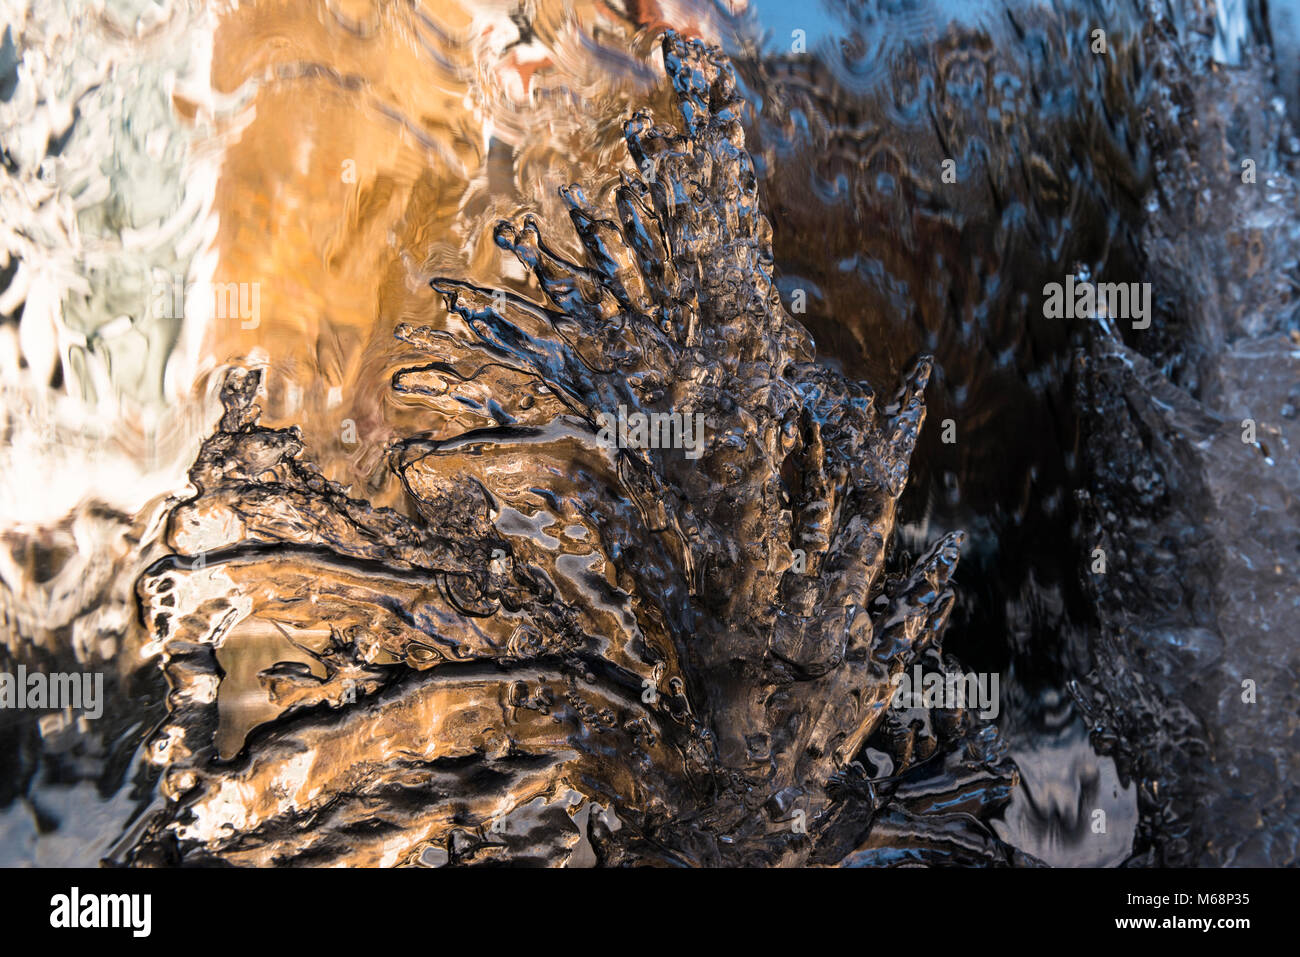 Impressionistic close up view of ice forming as a polished metal garden water feature freezes in winter with reflections of houses in sunlight. Stock Photo